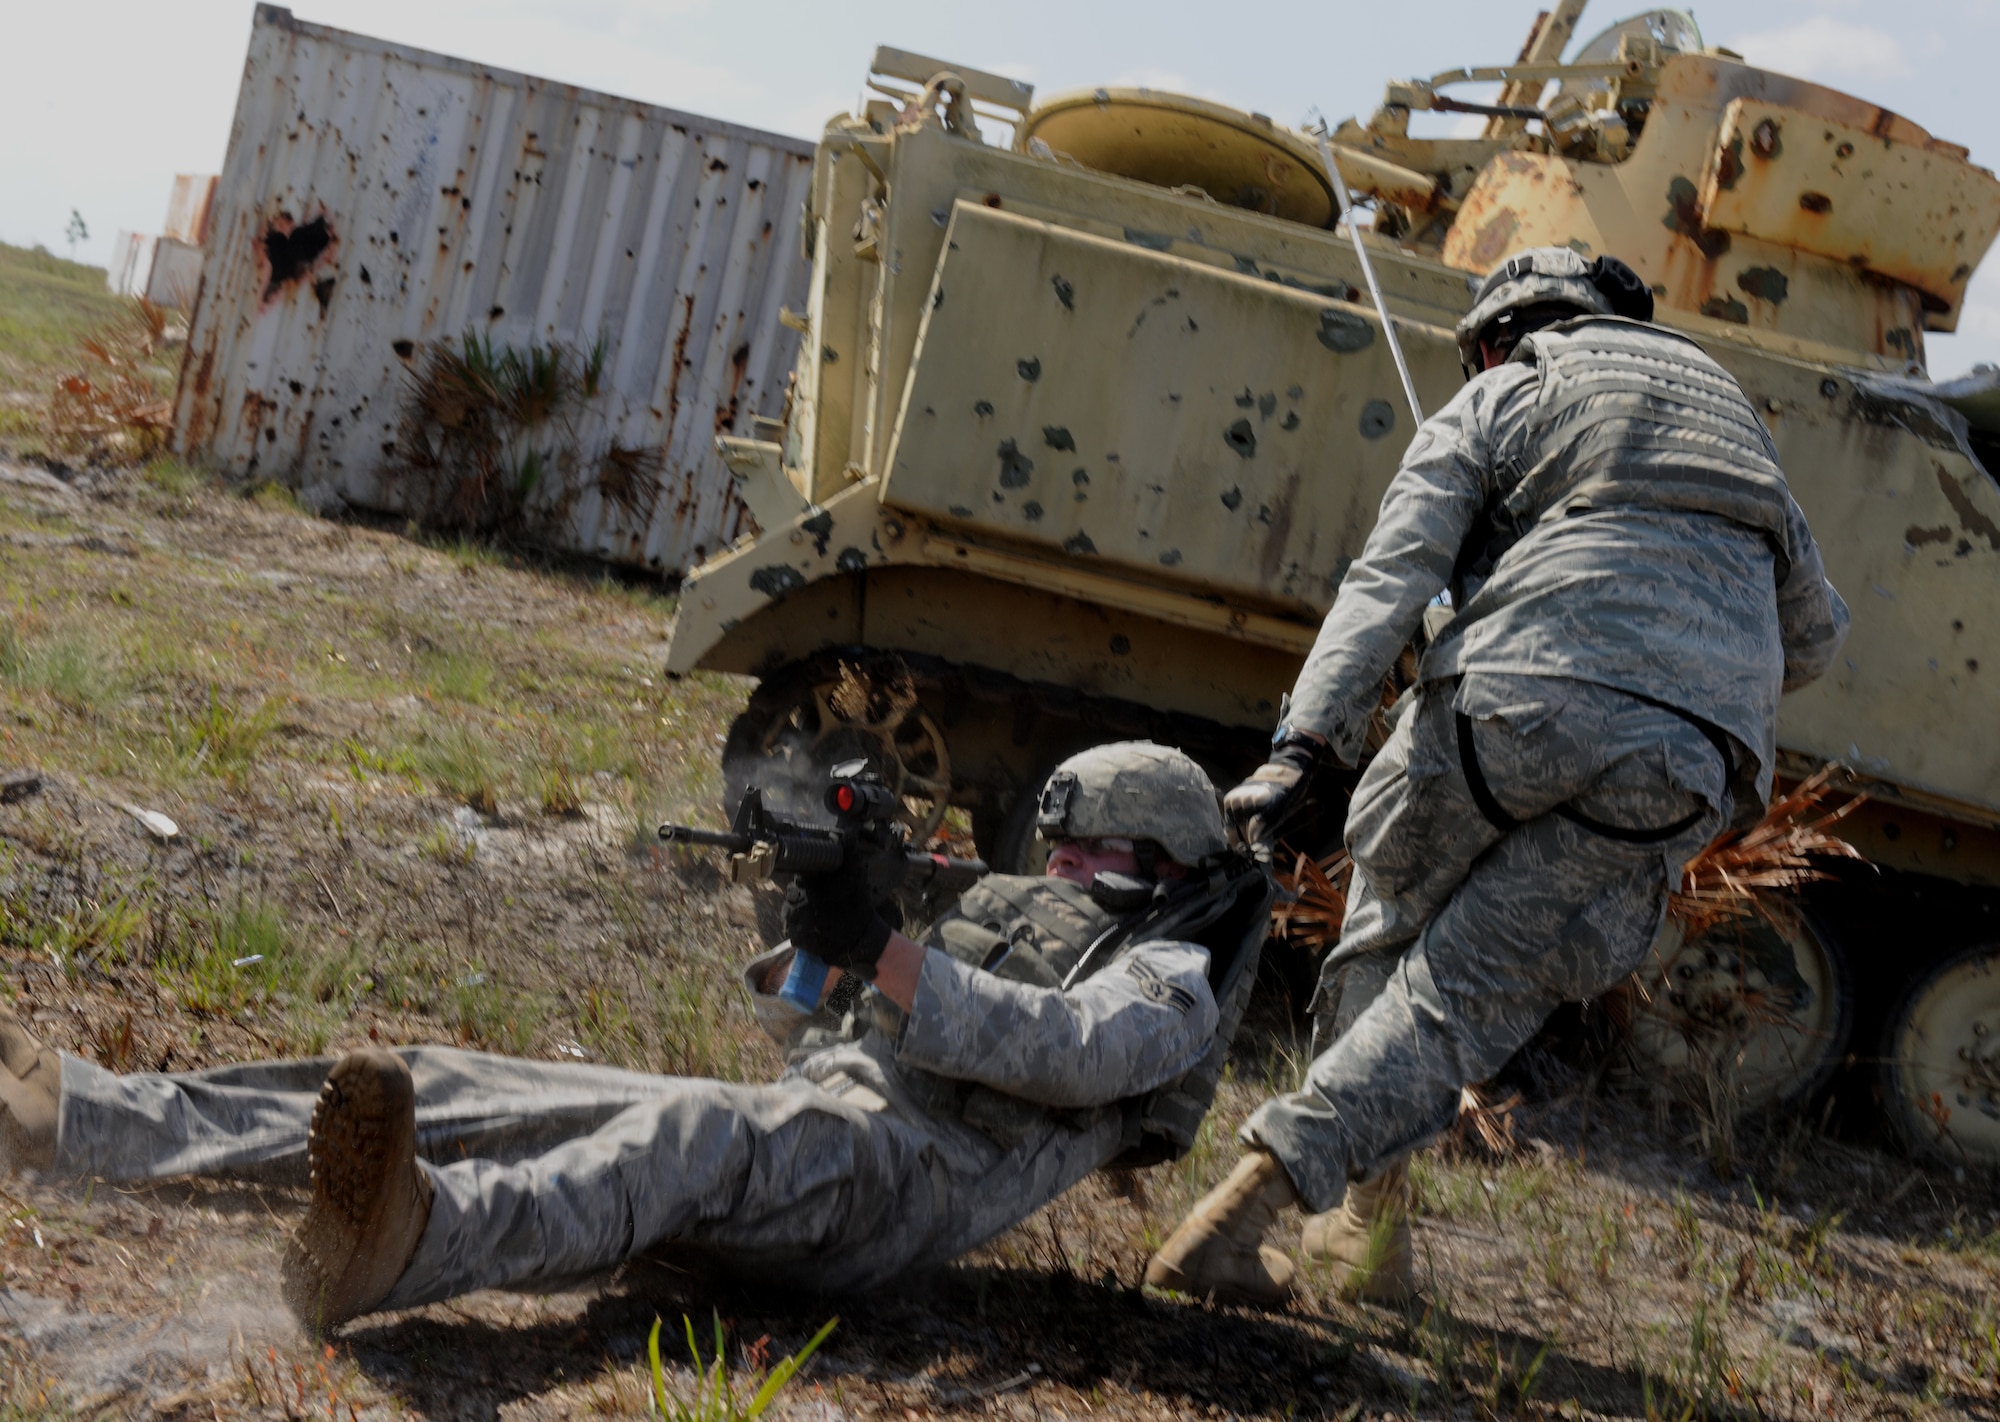 AVON PARK, Fla.-- Senior Airman Menva Abelian, 823rd Base Defense Squadron fire team member, Moody Air Force Base, Ga., drags a member of his fire team to safety during joint exercise ATLANTIC STRIKE 11-01 Feb. 16. Members from the 823rd BDS acted as forward ground forces during the joint exercise. (U.S. Air Force photo/Airman 1st Class Benjamin Wiseman)(RELEASED)